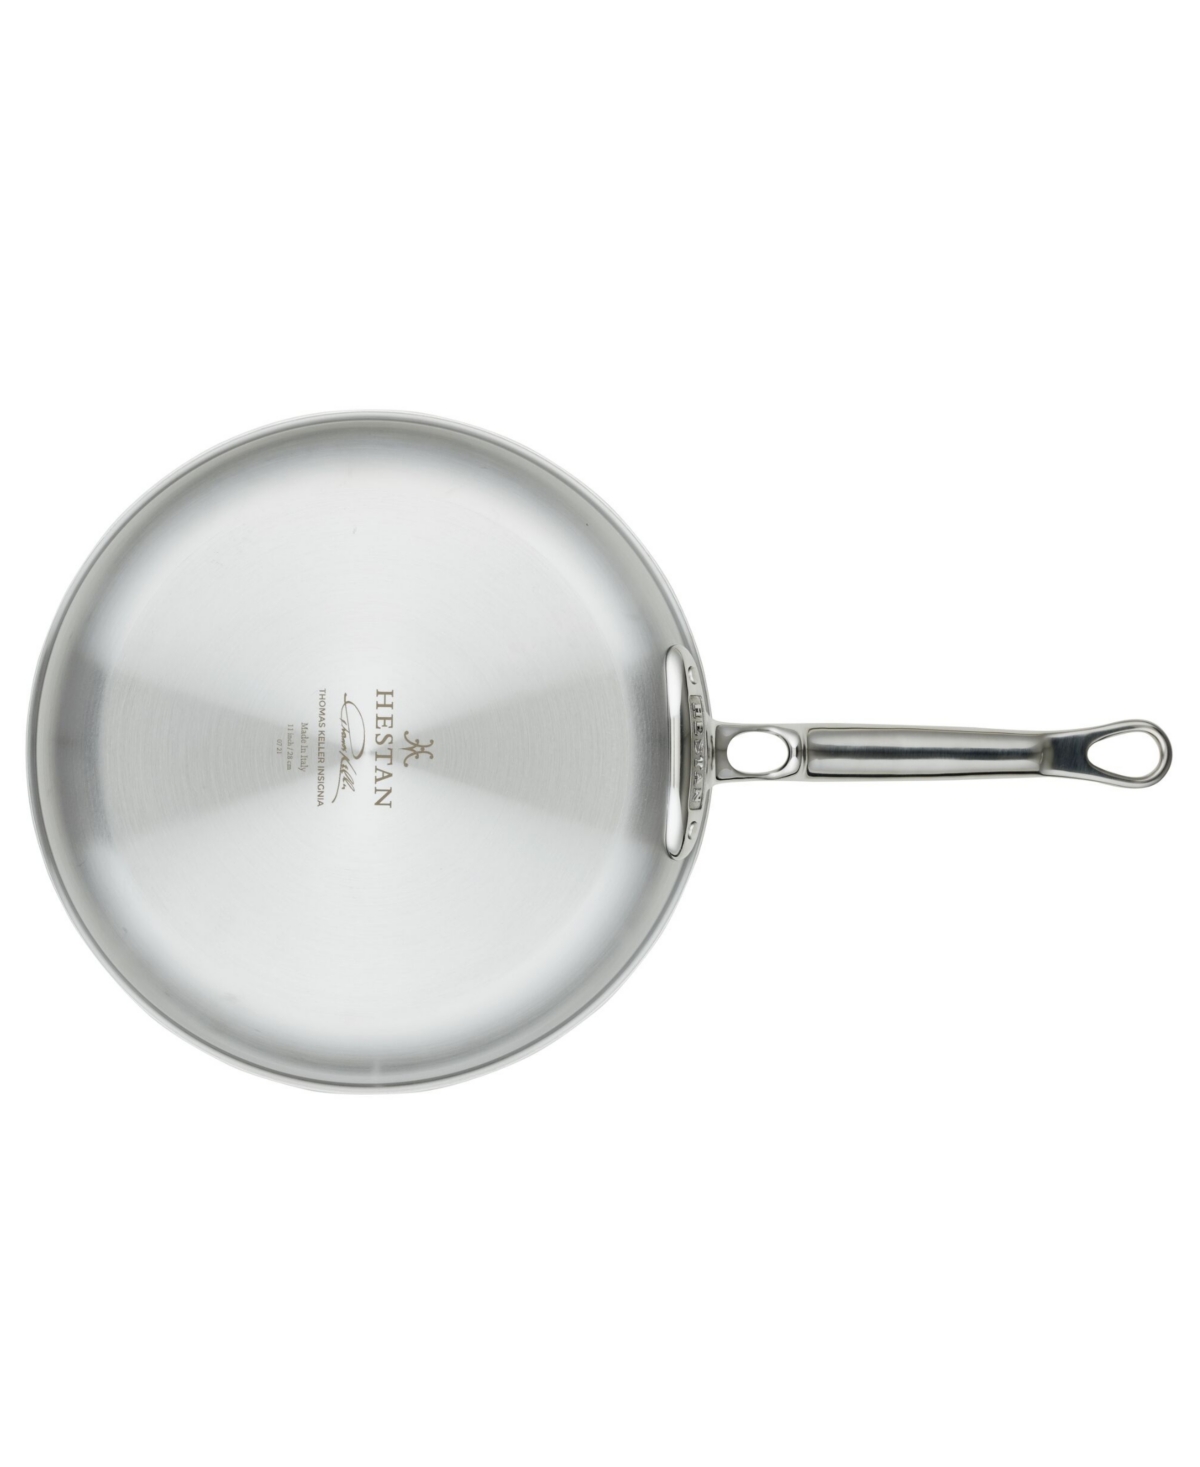 Shop Hestan Thomas Keller Insignia Commercial Clad Stainless Steel With Titum Nonstick 11" Open Saute Pan In No Color